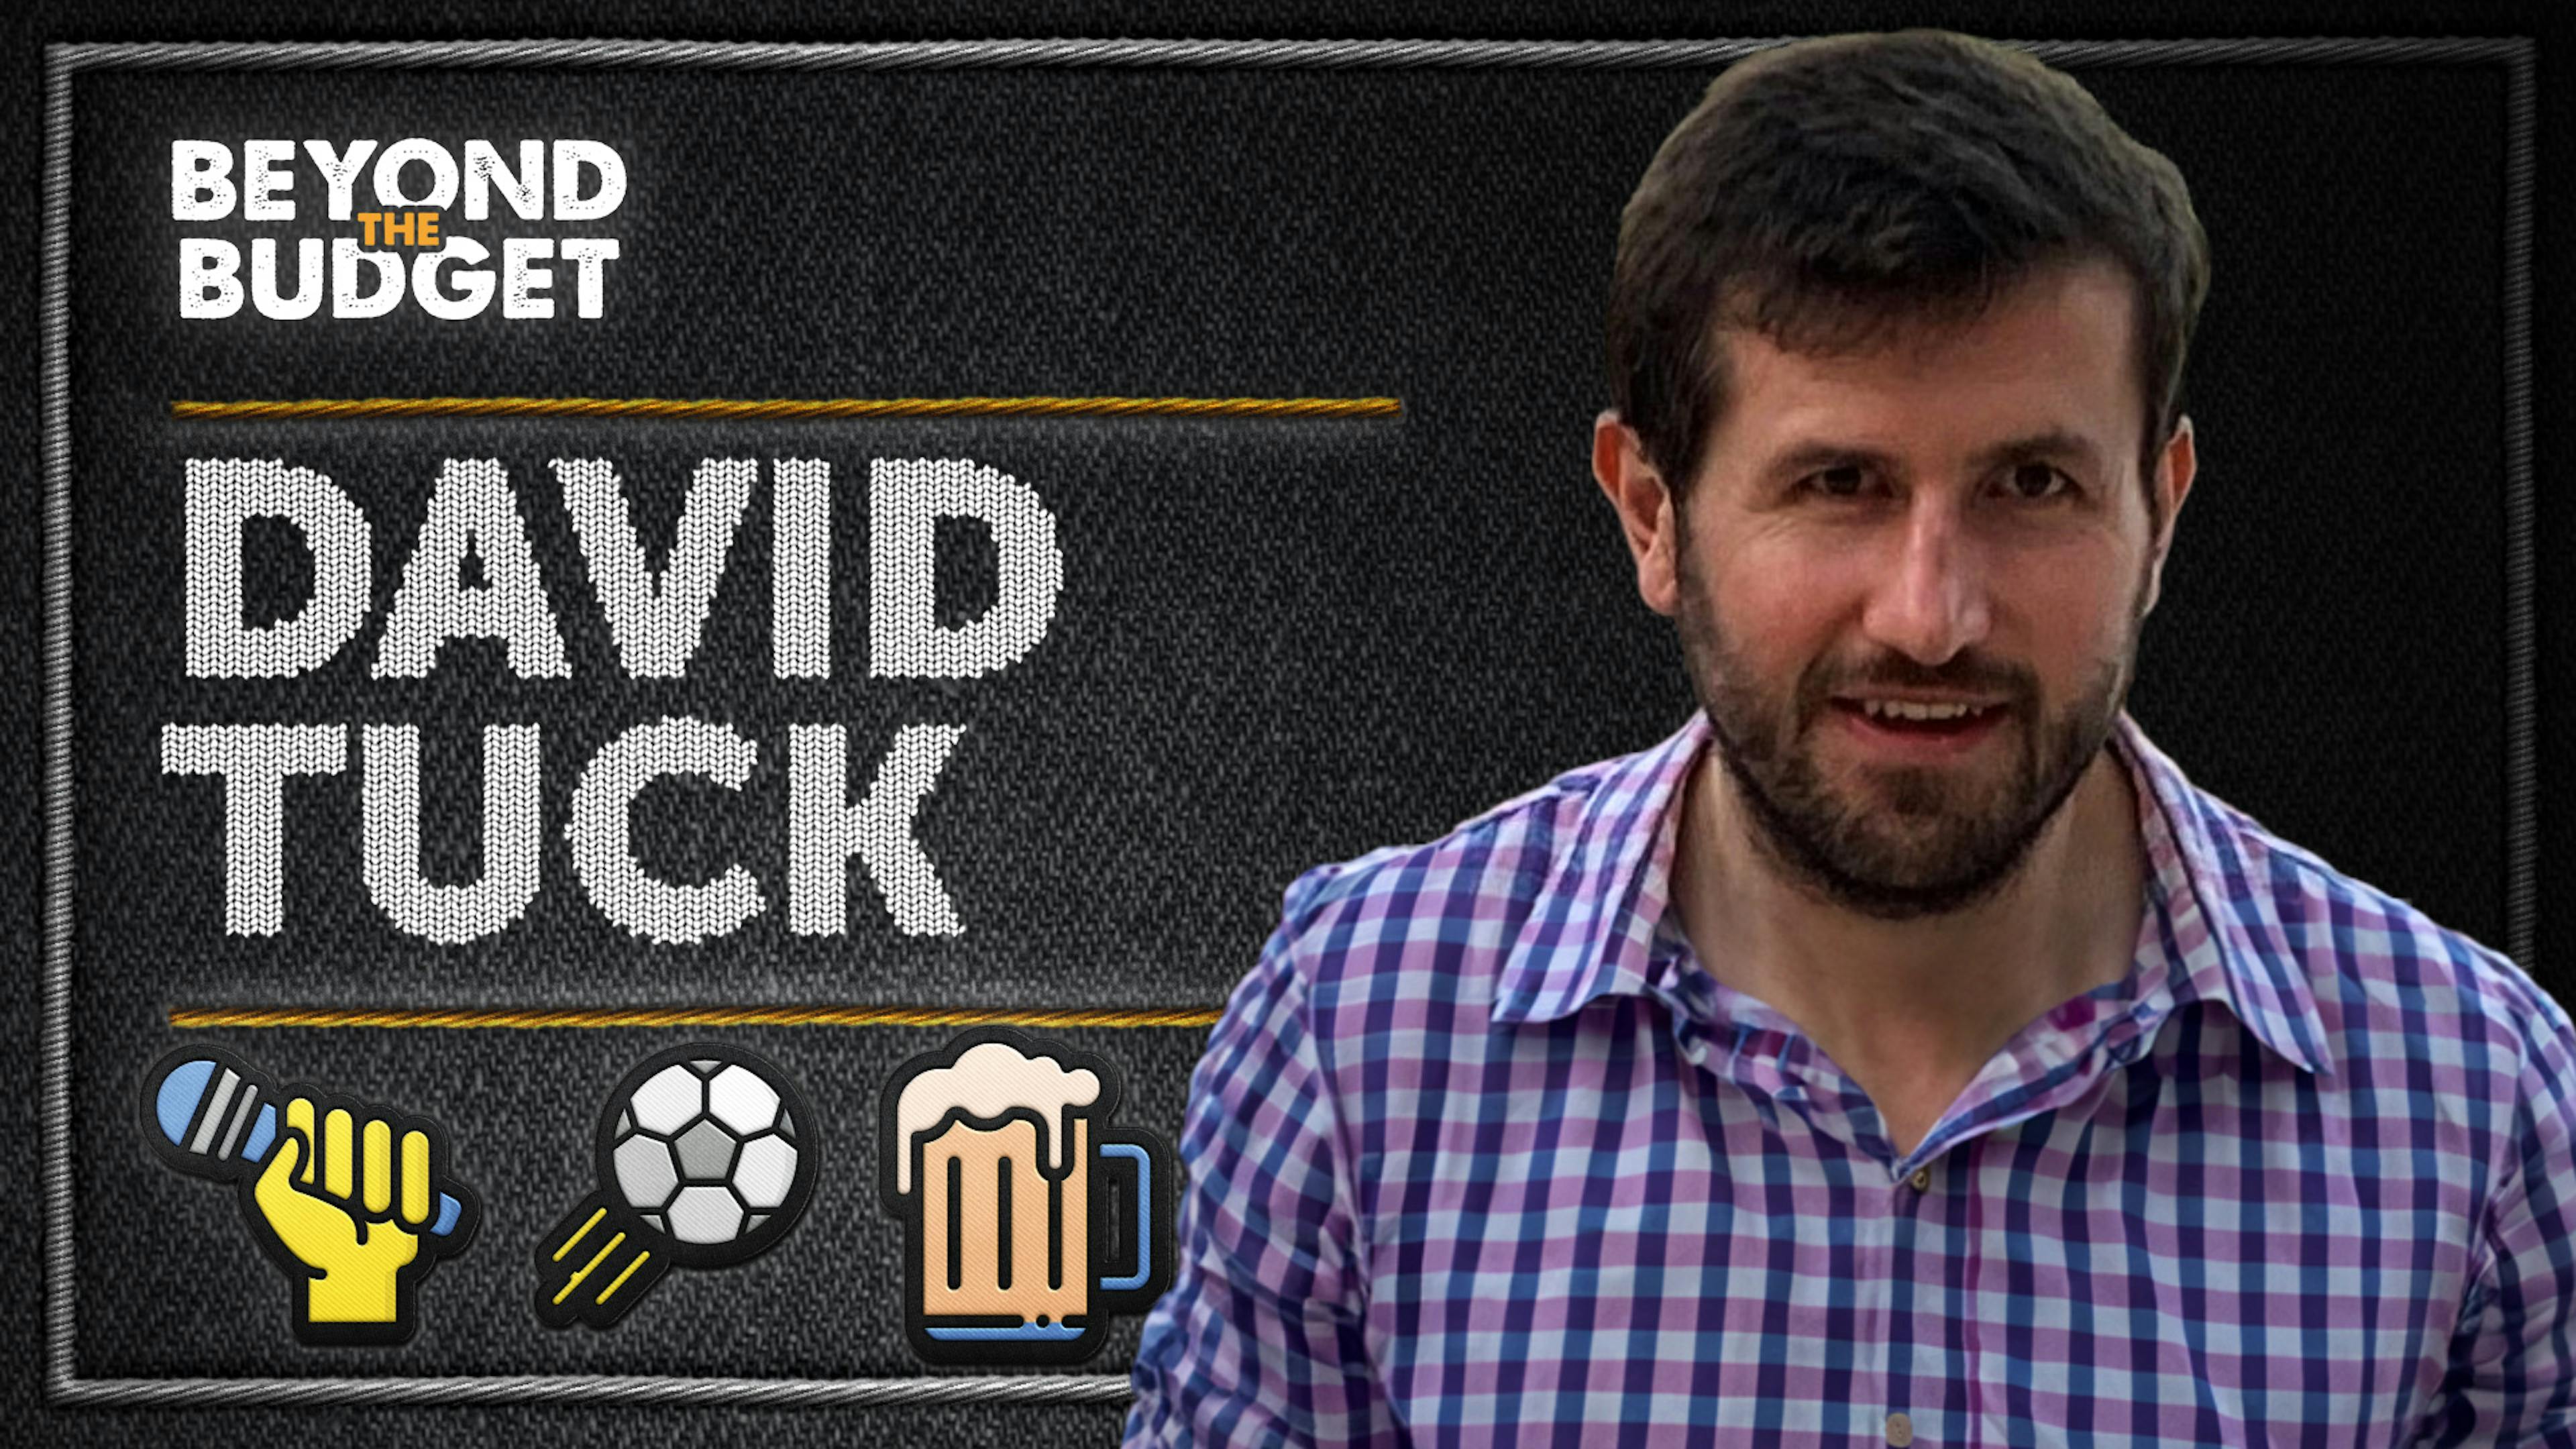 Beyond the Budget thumbnail featuring a microphone, soccer ball, beer, and David Tuck.